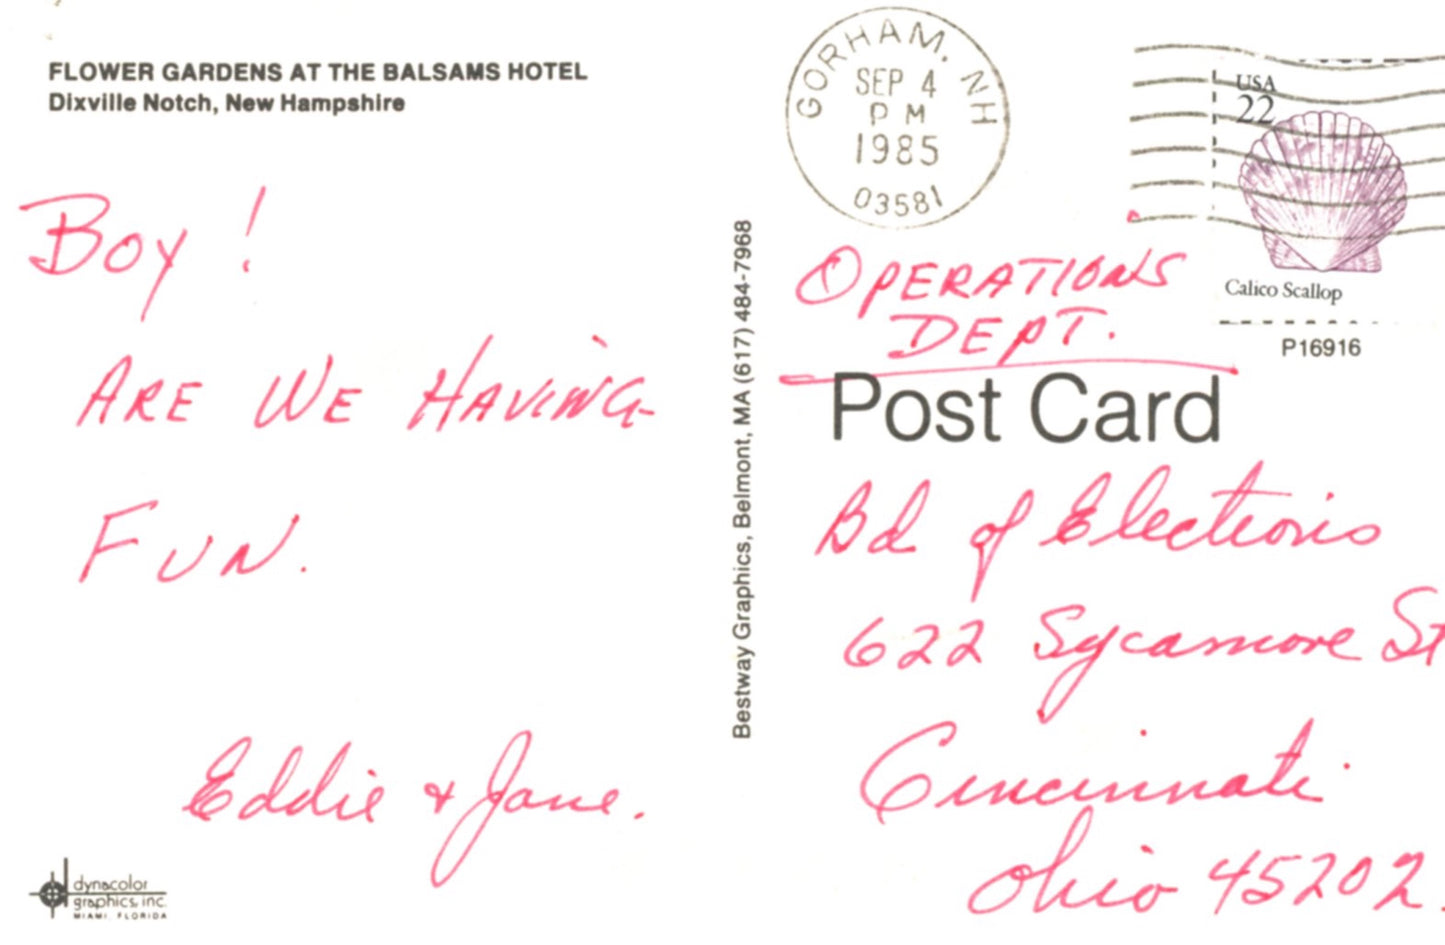 The Balsams Hotel DIXVILLE NOTCH NEW HAMPSHIRE Vintage Postcard